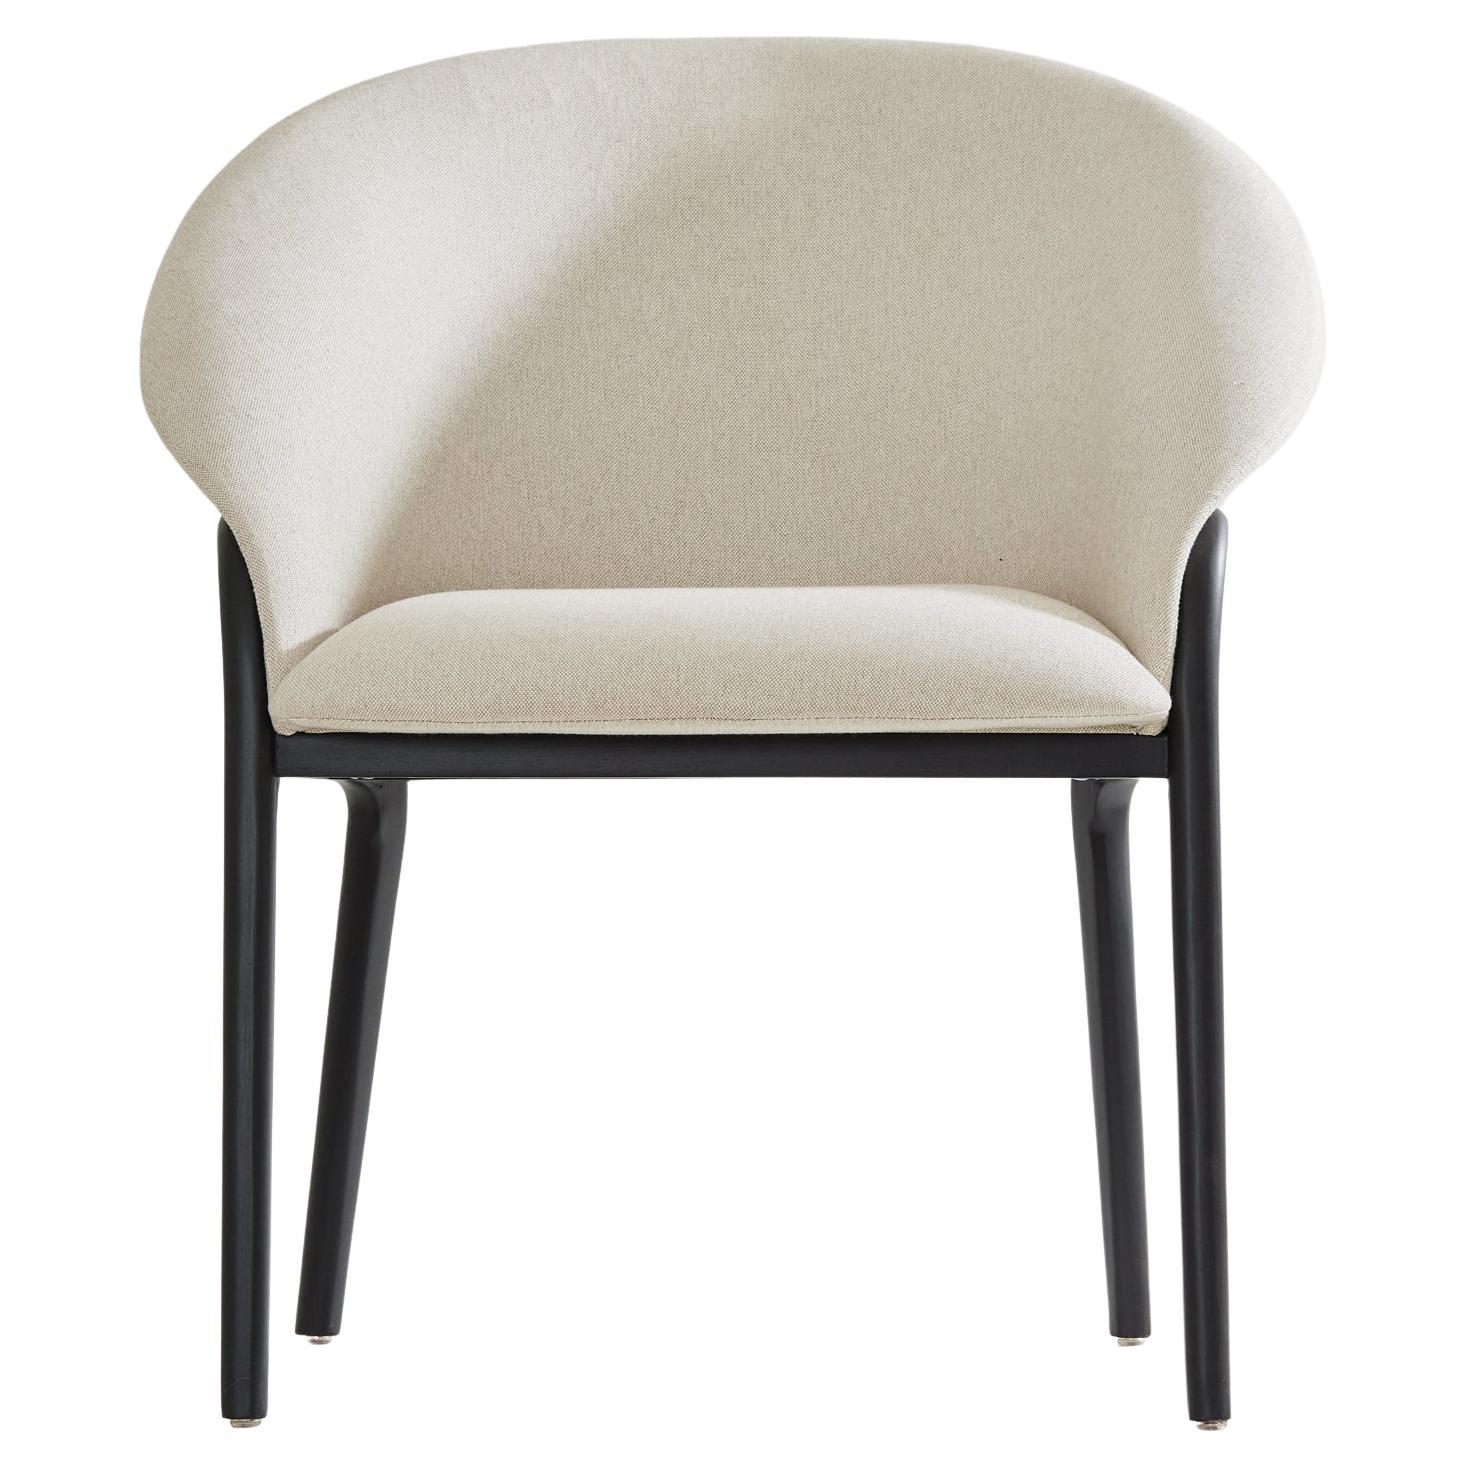 Minimalist Organic Chair in black Solid Wood, off-white textiles Seating For Sale